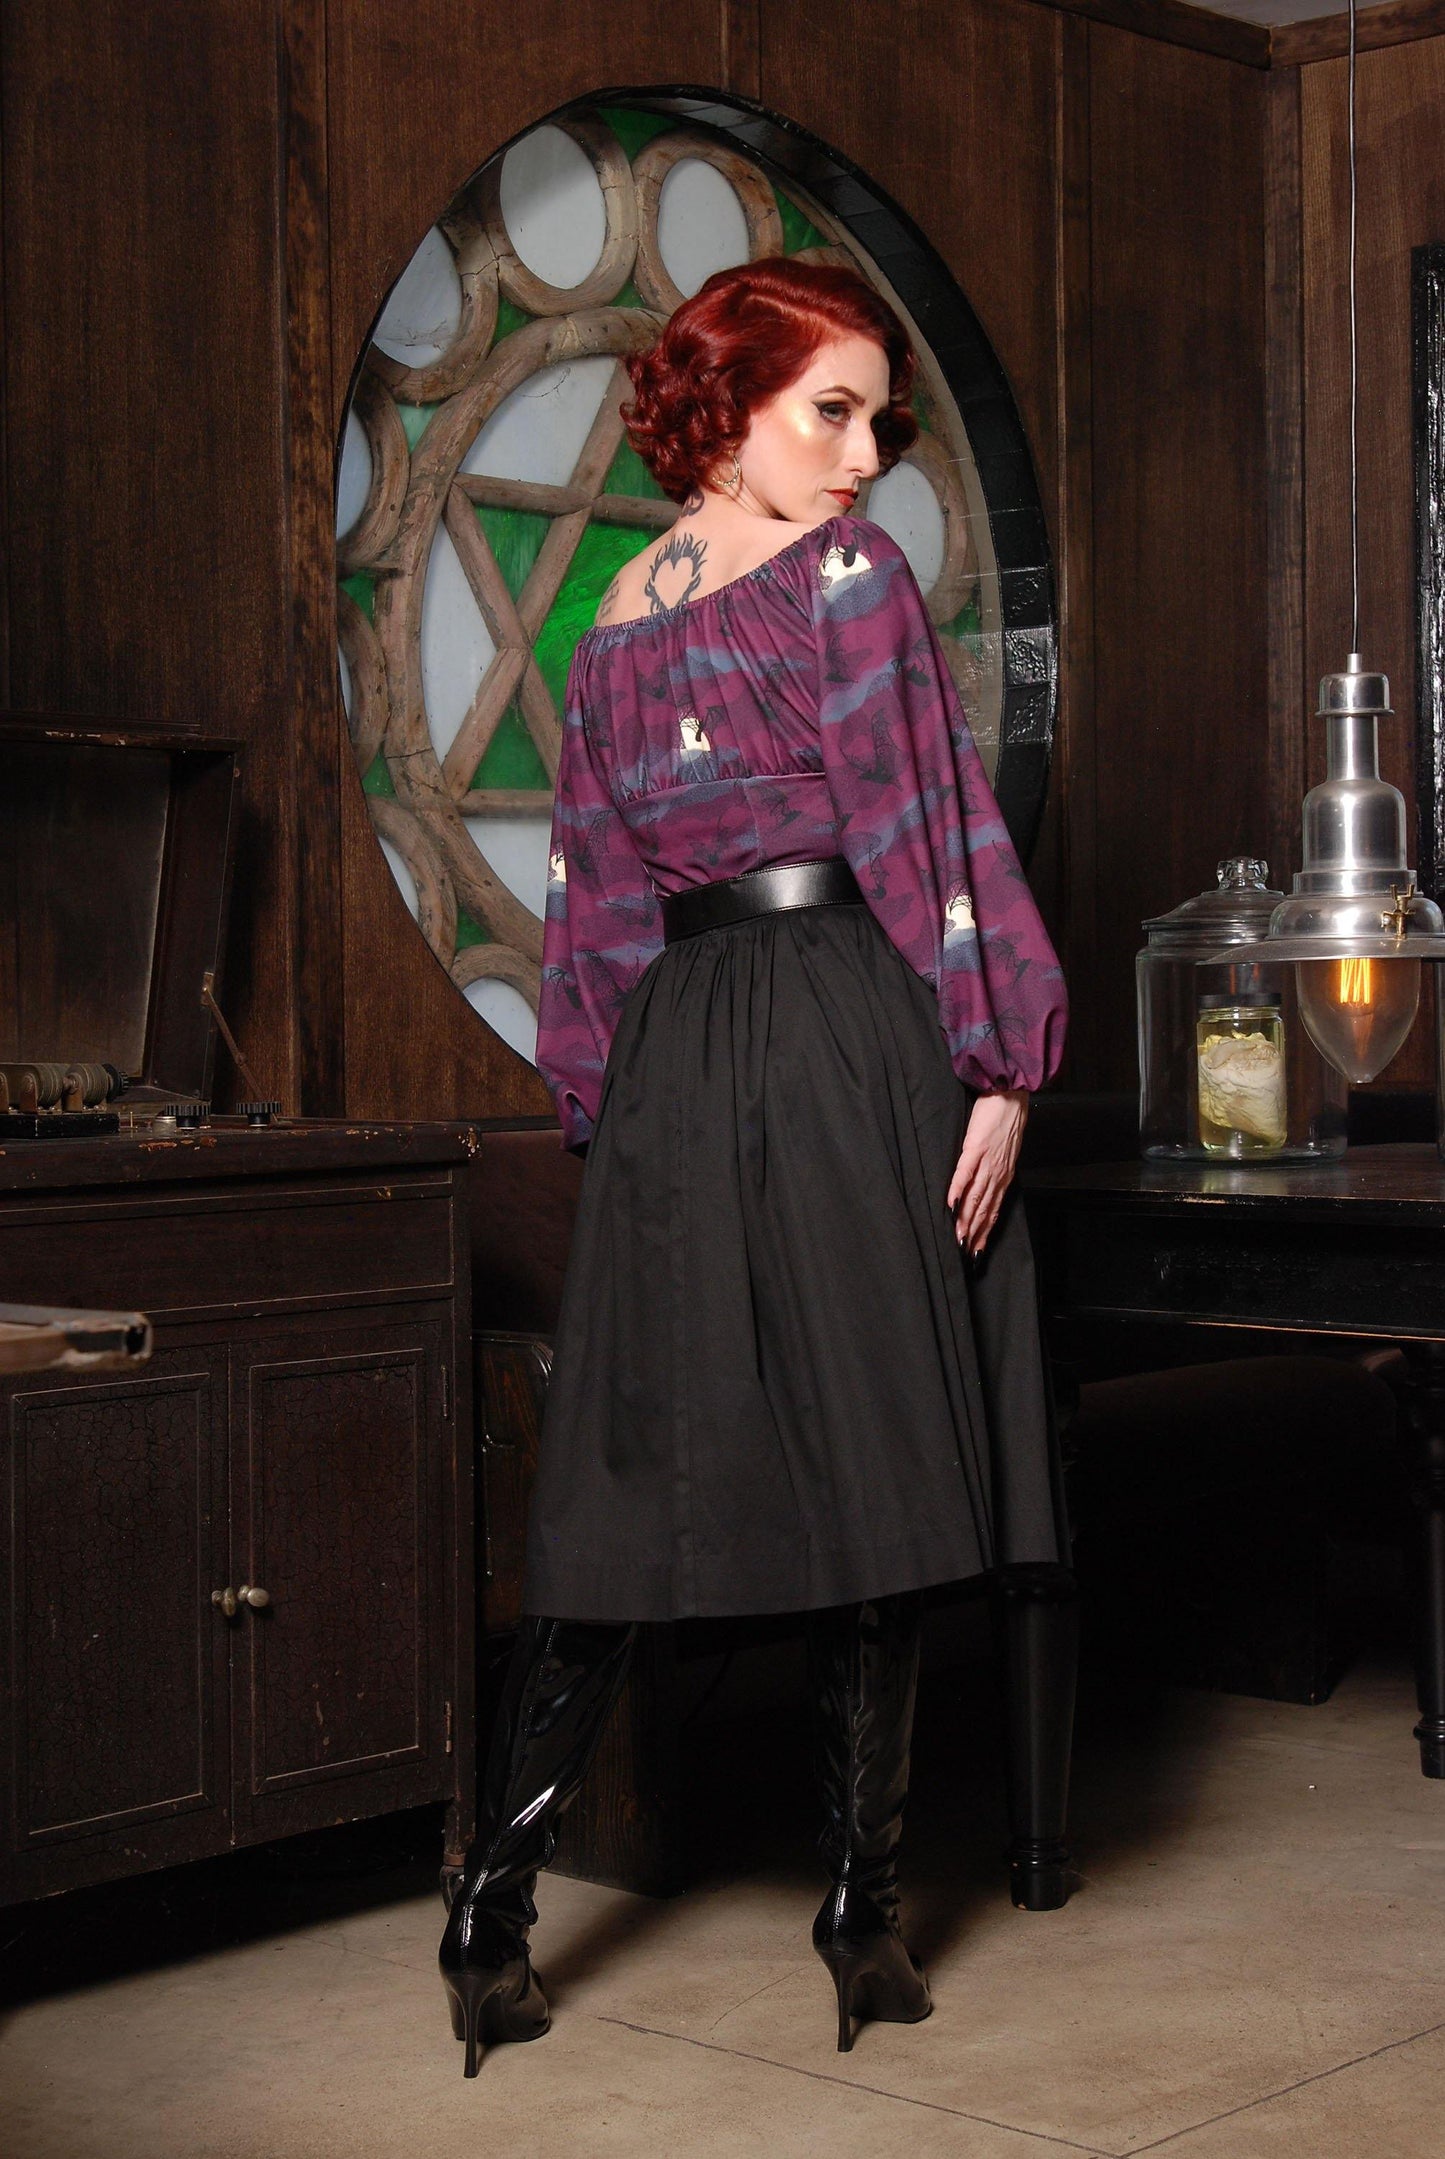 Bella Vintage Gathered Swing Skirt in Solid Black Cotton Sateen | Pinup Couture - pinupgirlclothing.com